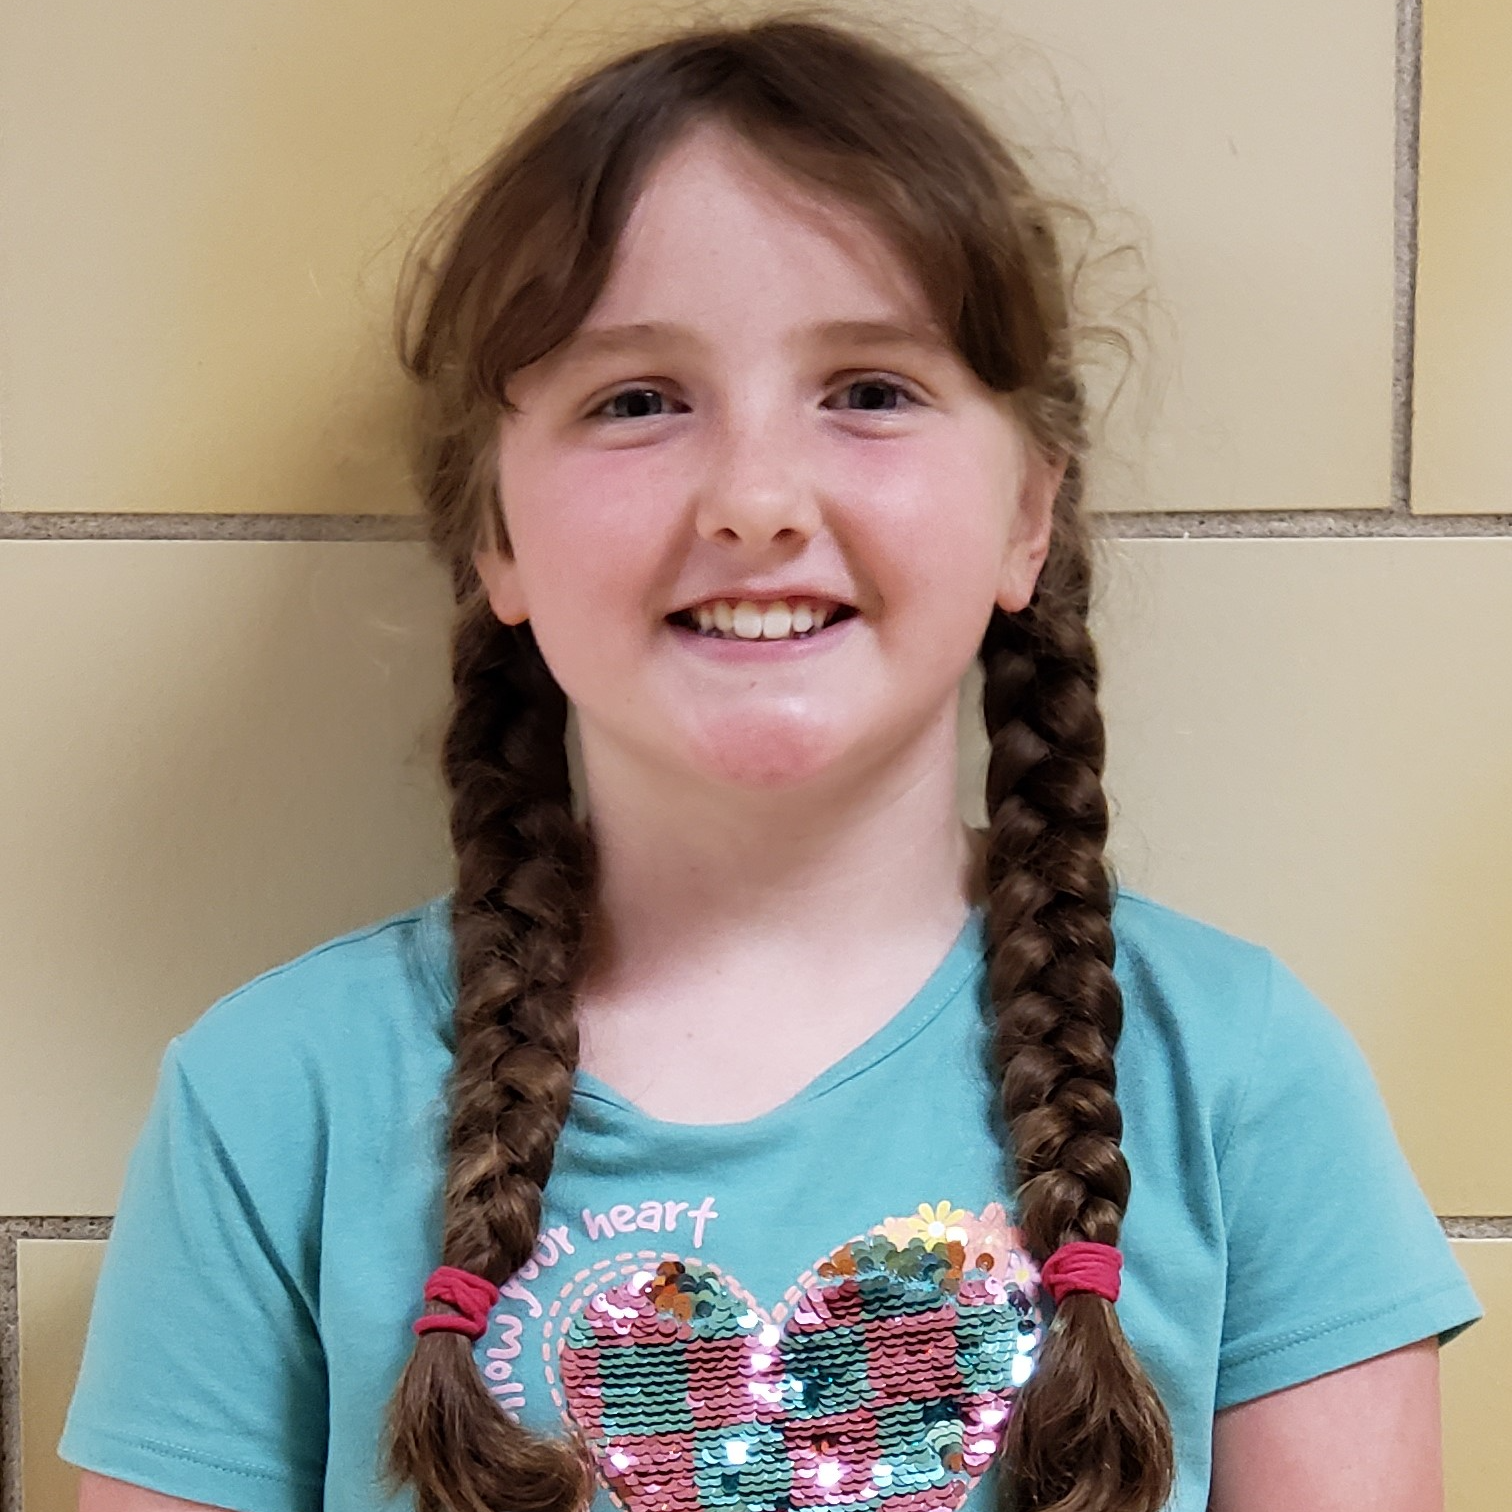 smiling girl with brown braids wearing a light blue t-shirt